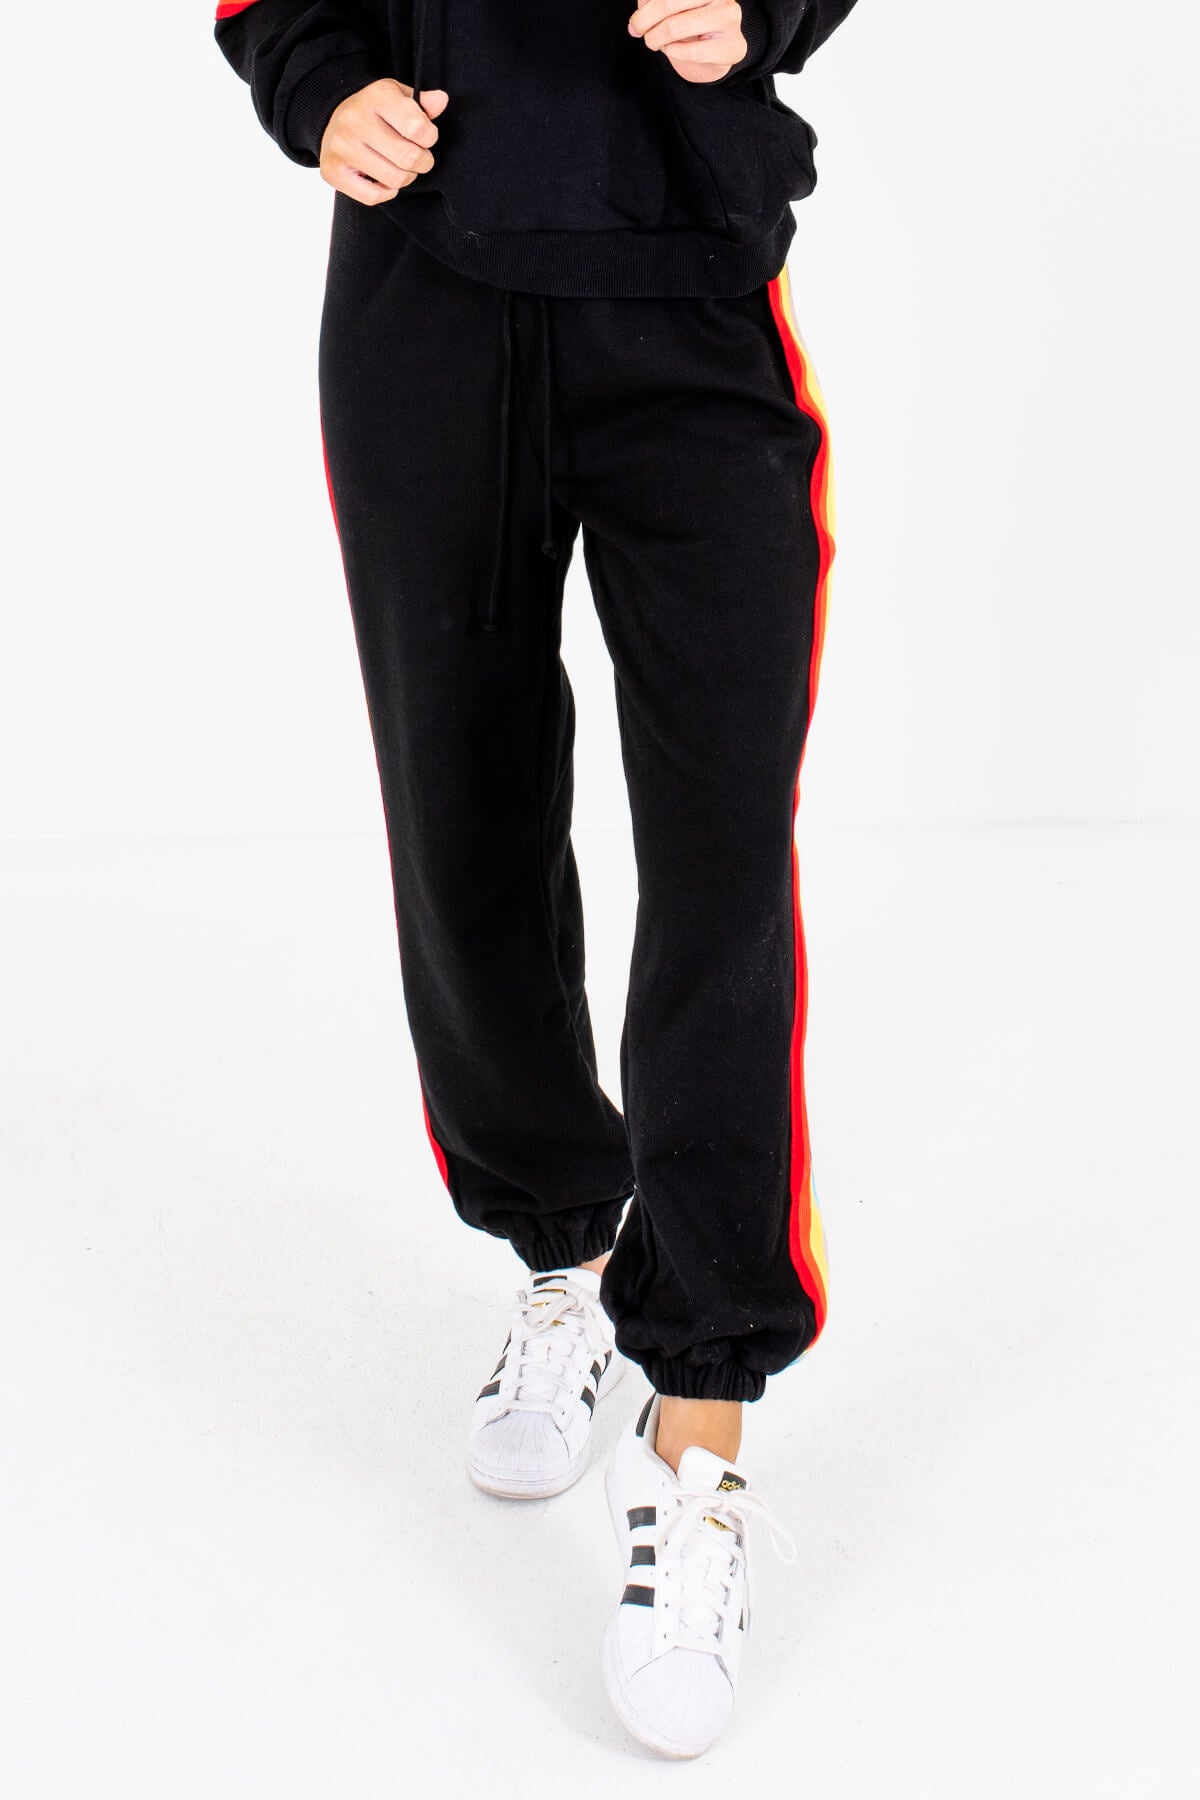 Black Cozy and Warm Boutique Jogger Pants for Women